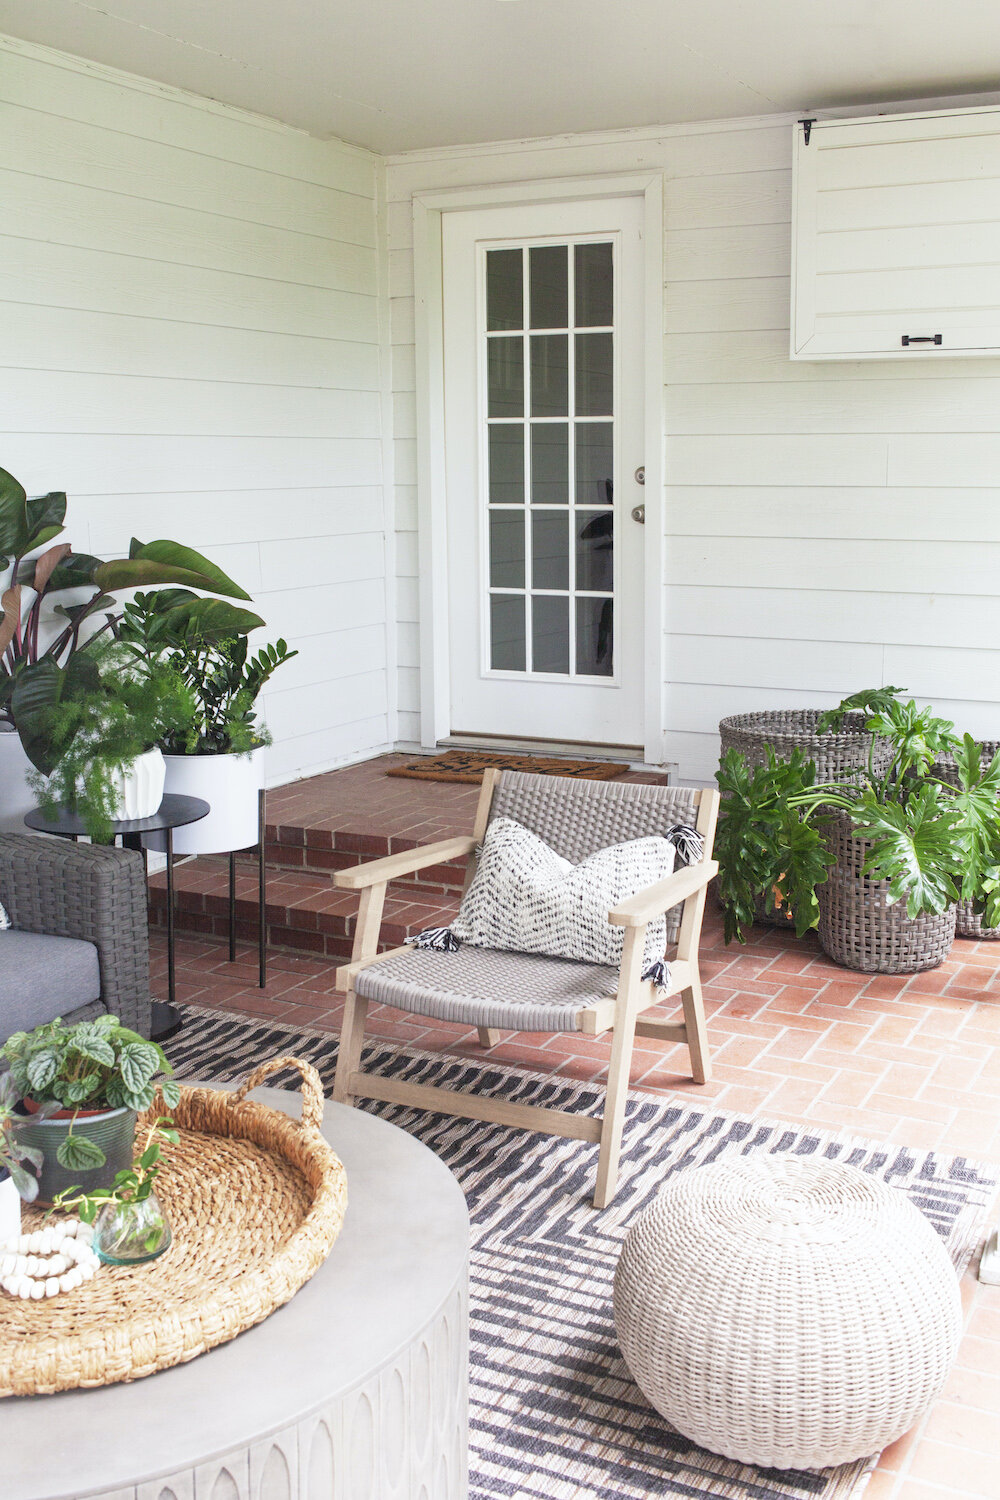 Home Reveal | The Flatbranch Patio — Scout & Nimble